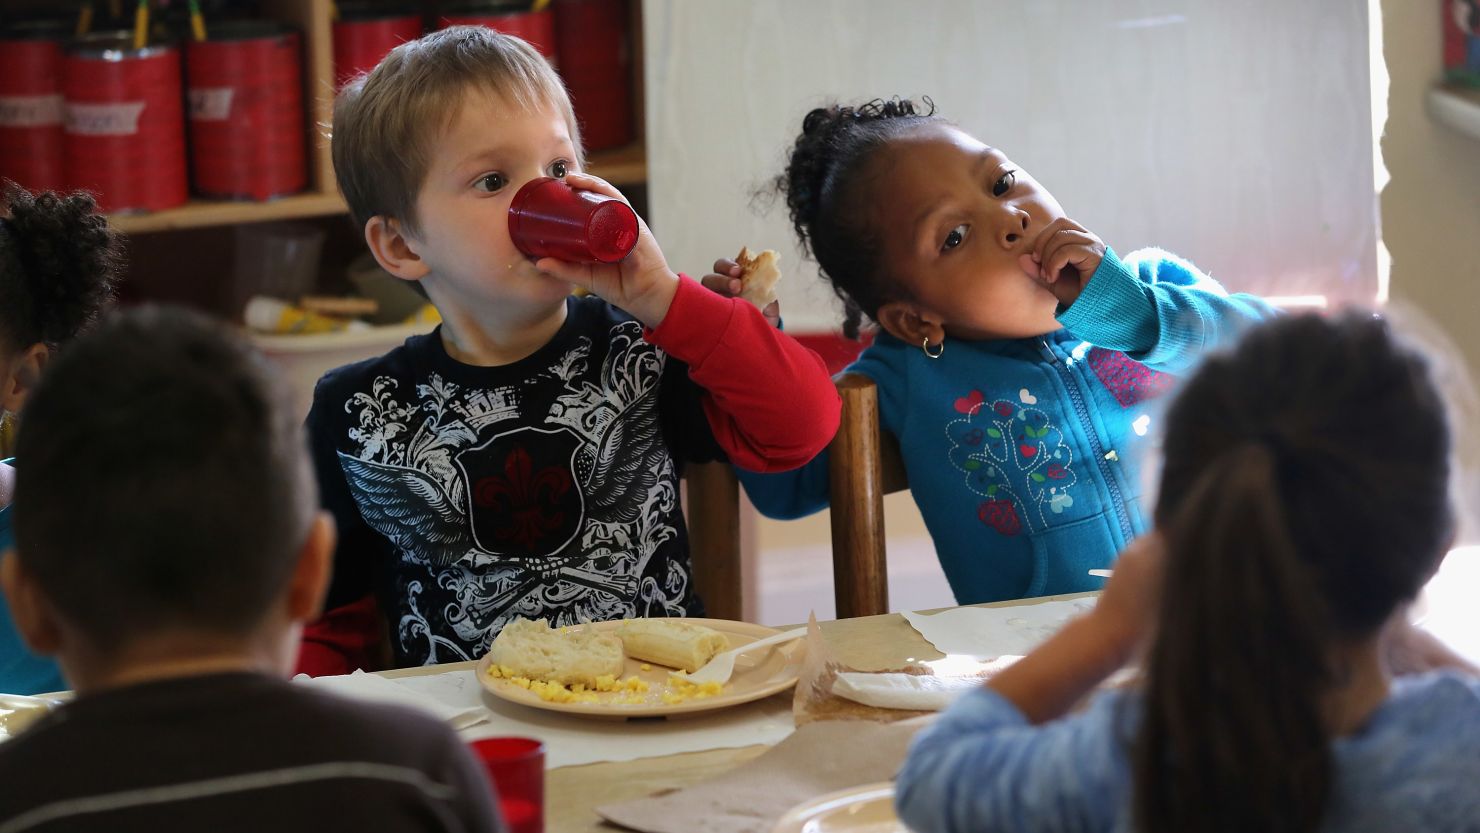 Children eat at a Head Start school in Woodbourne, New York, which provides early education to kids from low-income families. 
